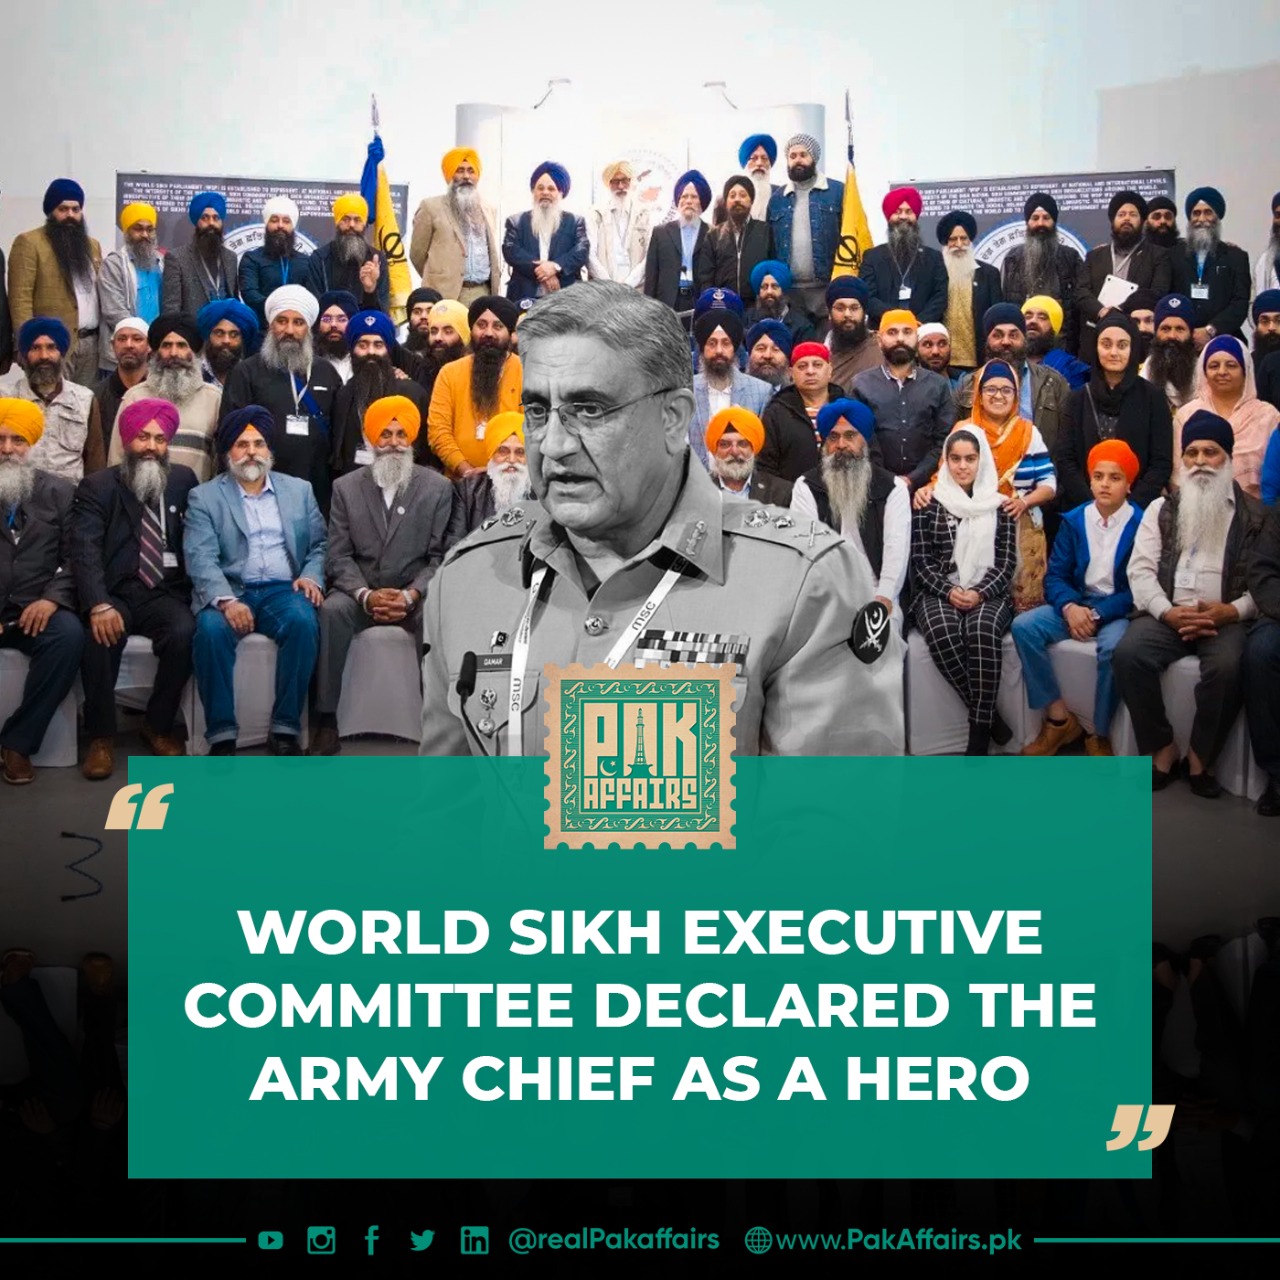 On Baba Guru Nanak's death anniversary, the Sikh Executive Committee declared the Army Chief a hero